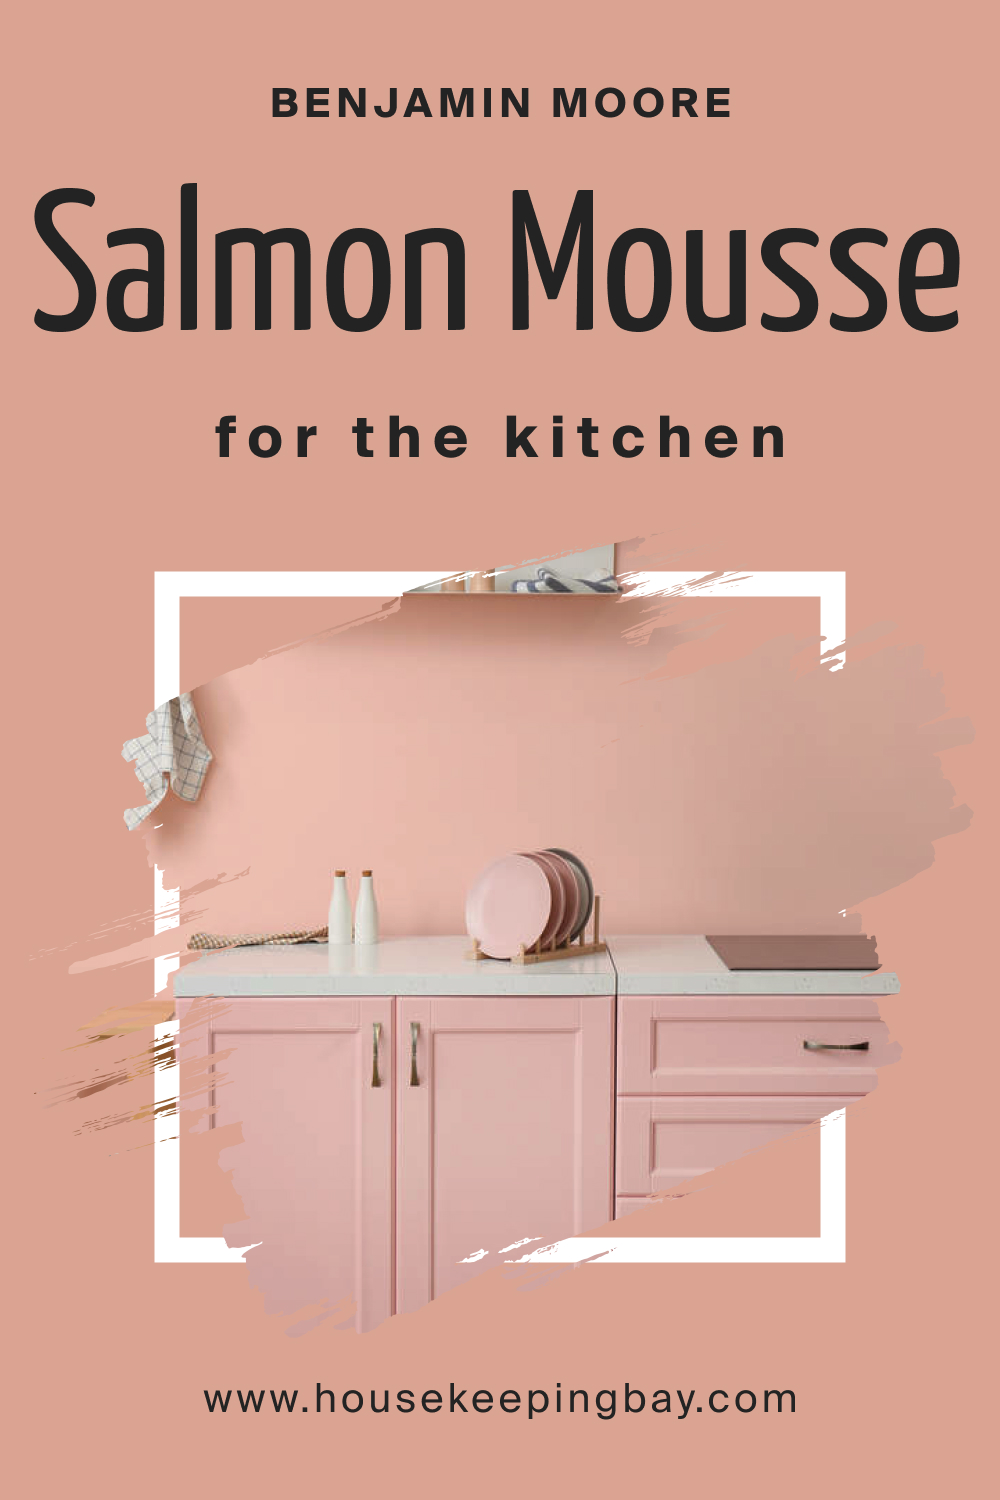 Benjamin Moore. BM Salmon Mousse 046 for the Kitchen